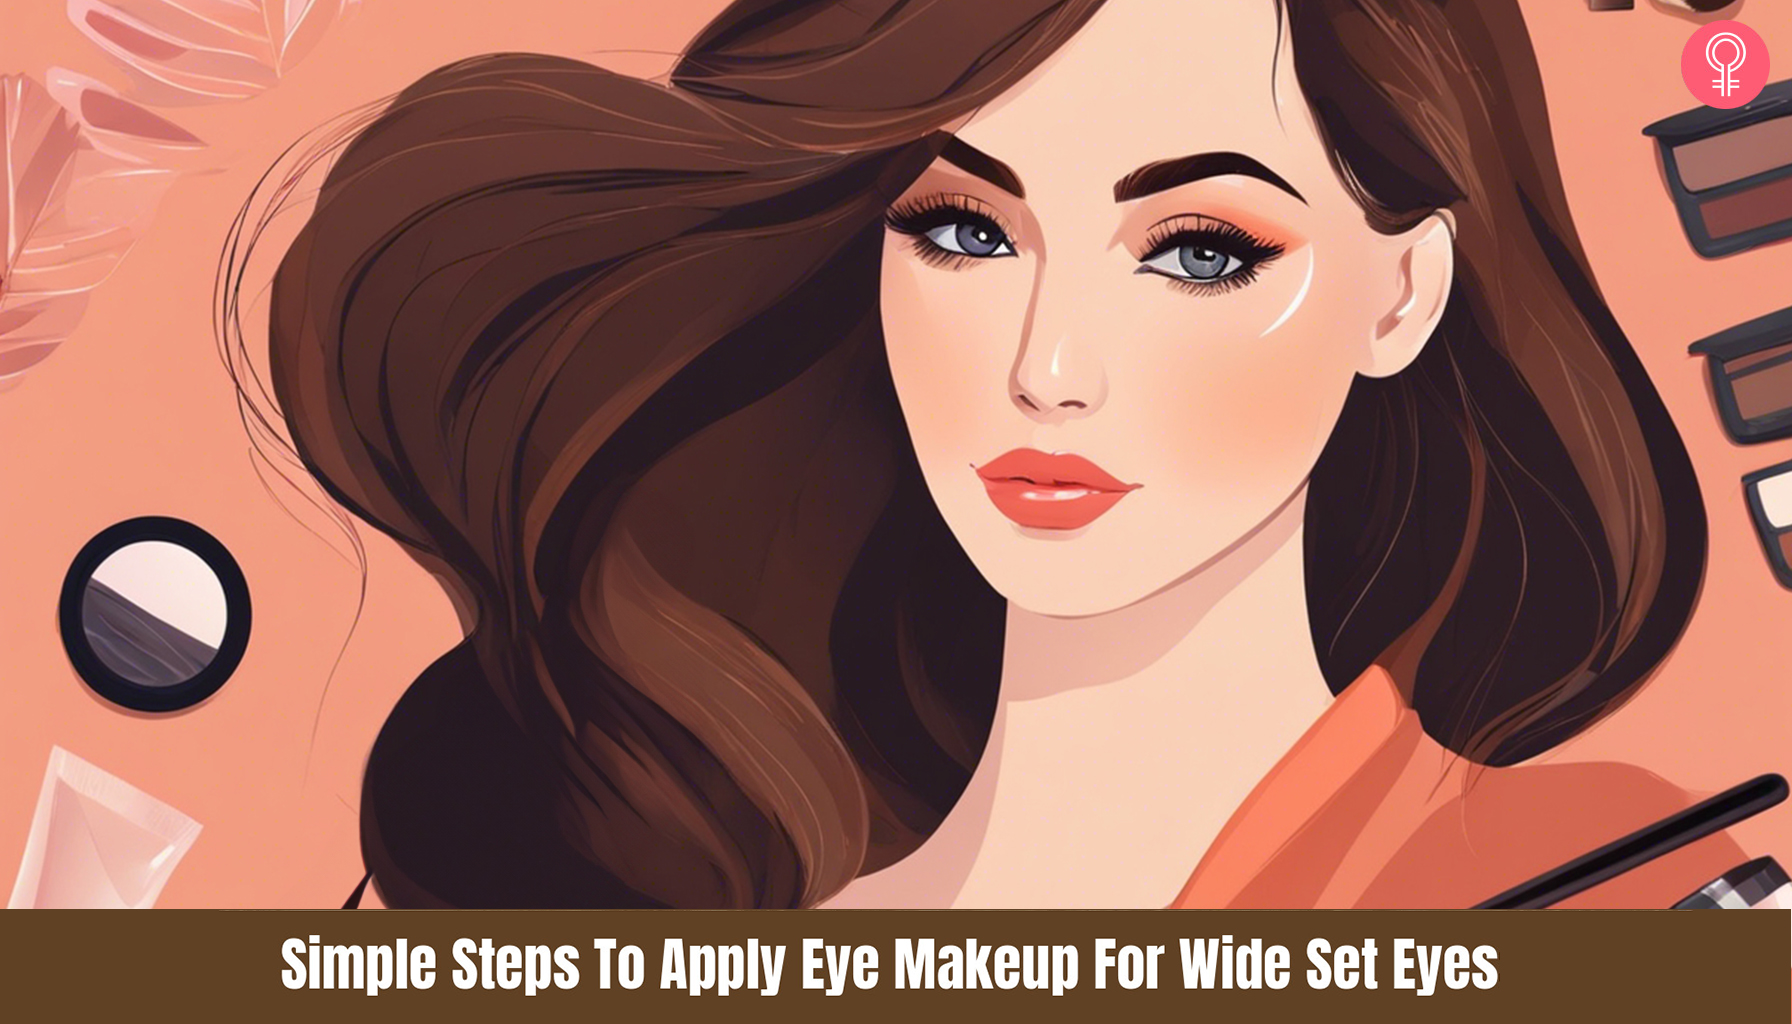 7 Simple Steps To Apply Eye Makeup For Wide Set Eyes: